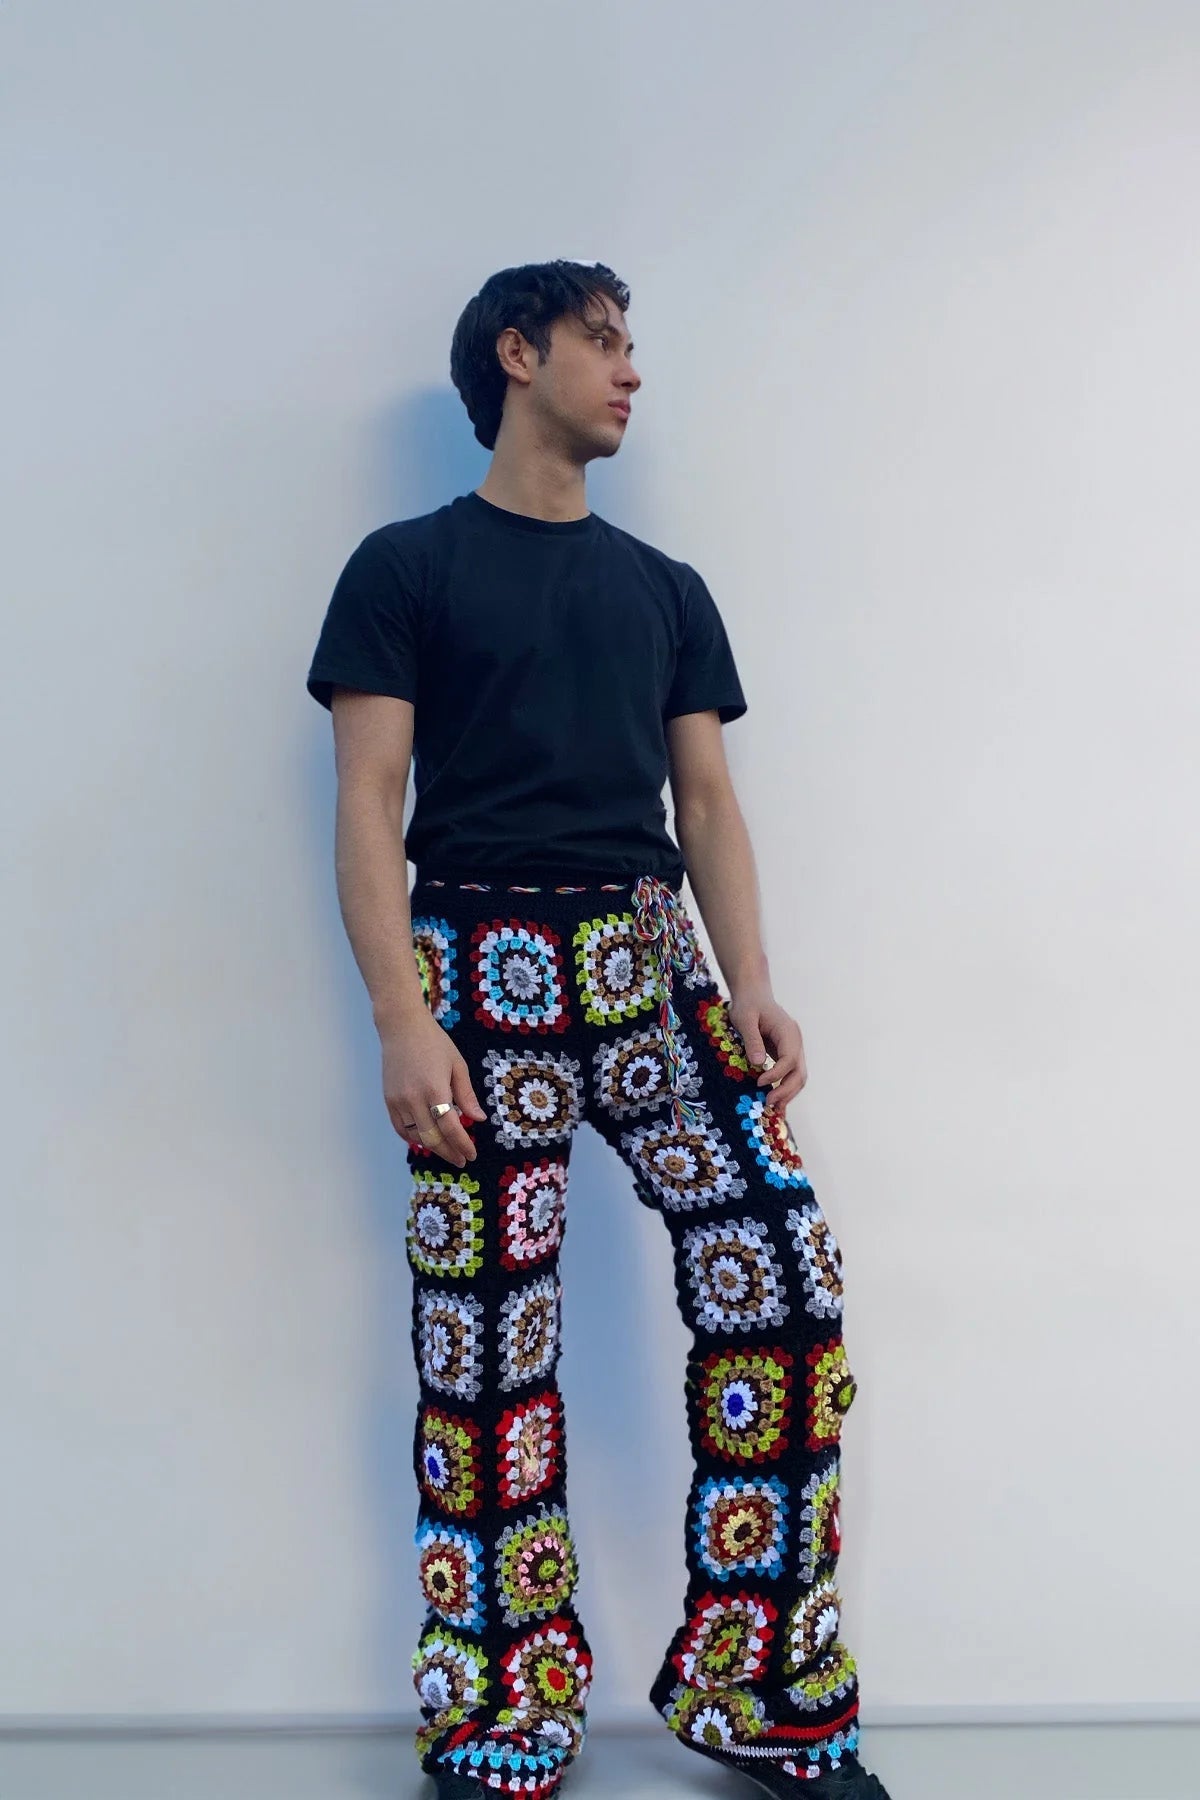 Granny Square Unisex Pants Blend Comfort and Style - Smyrna Collective